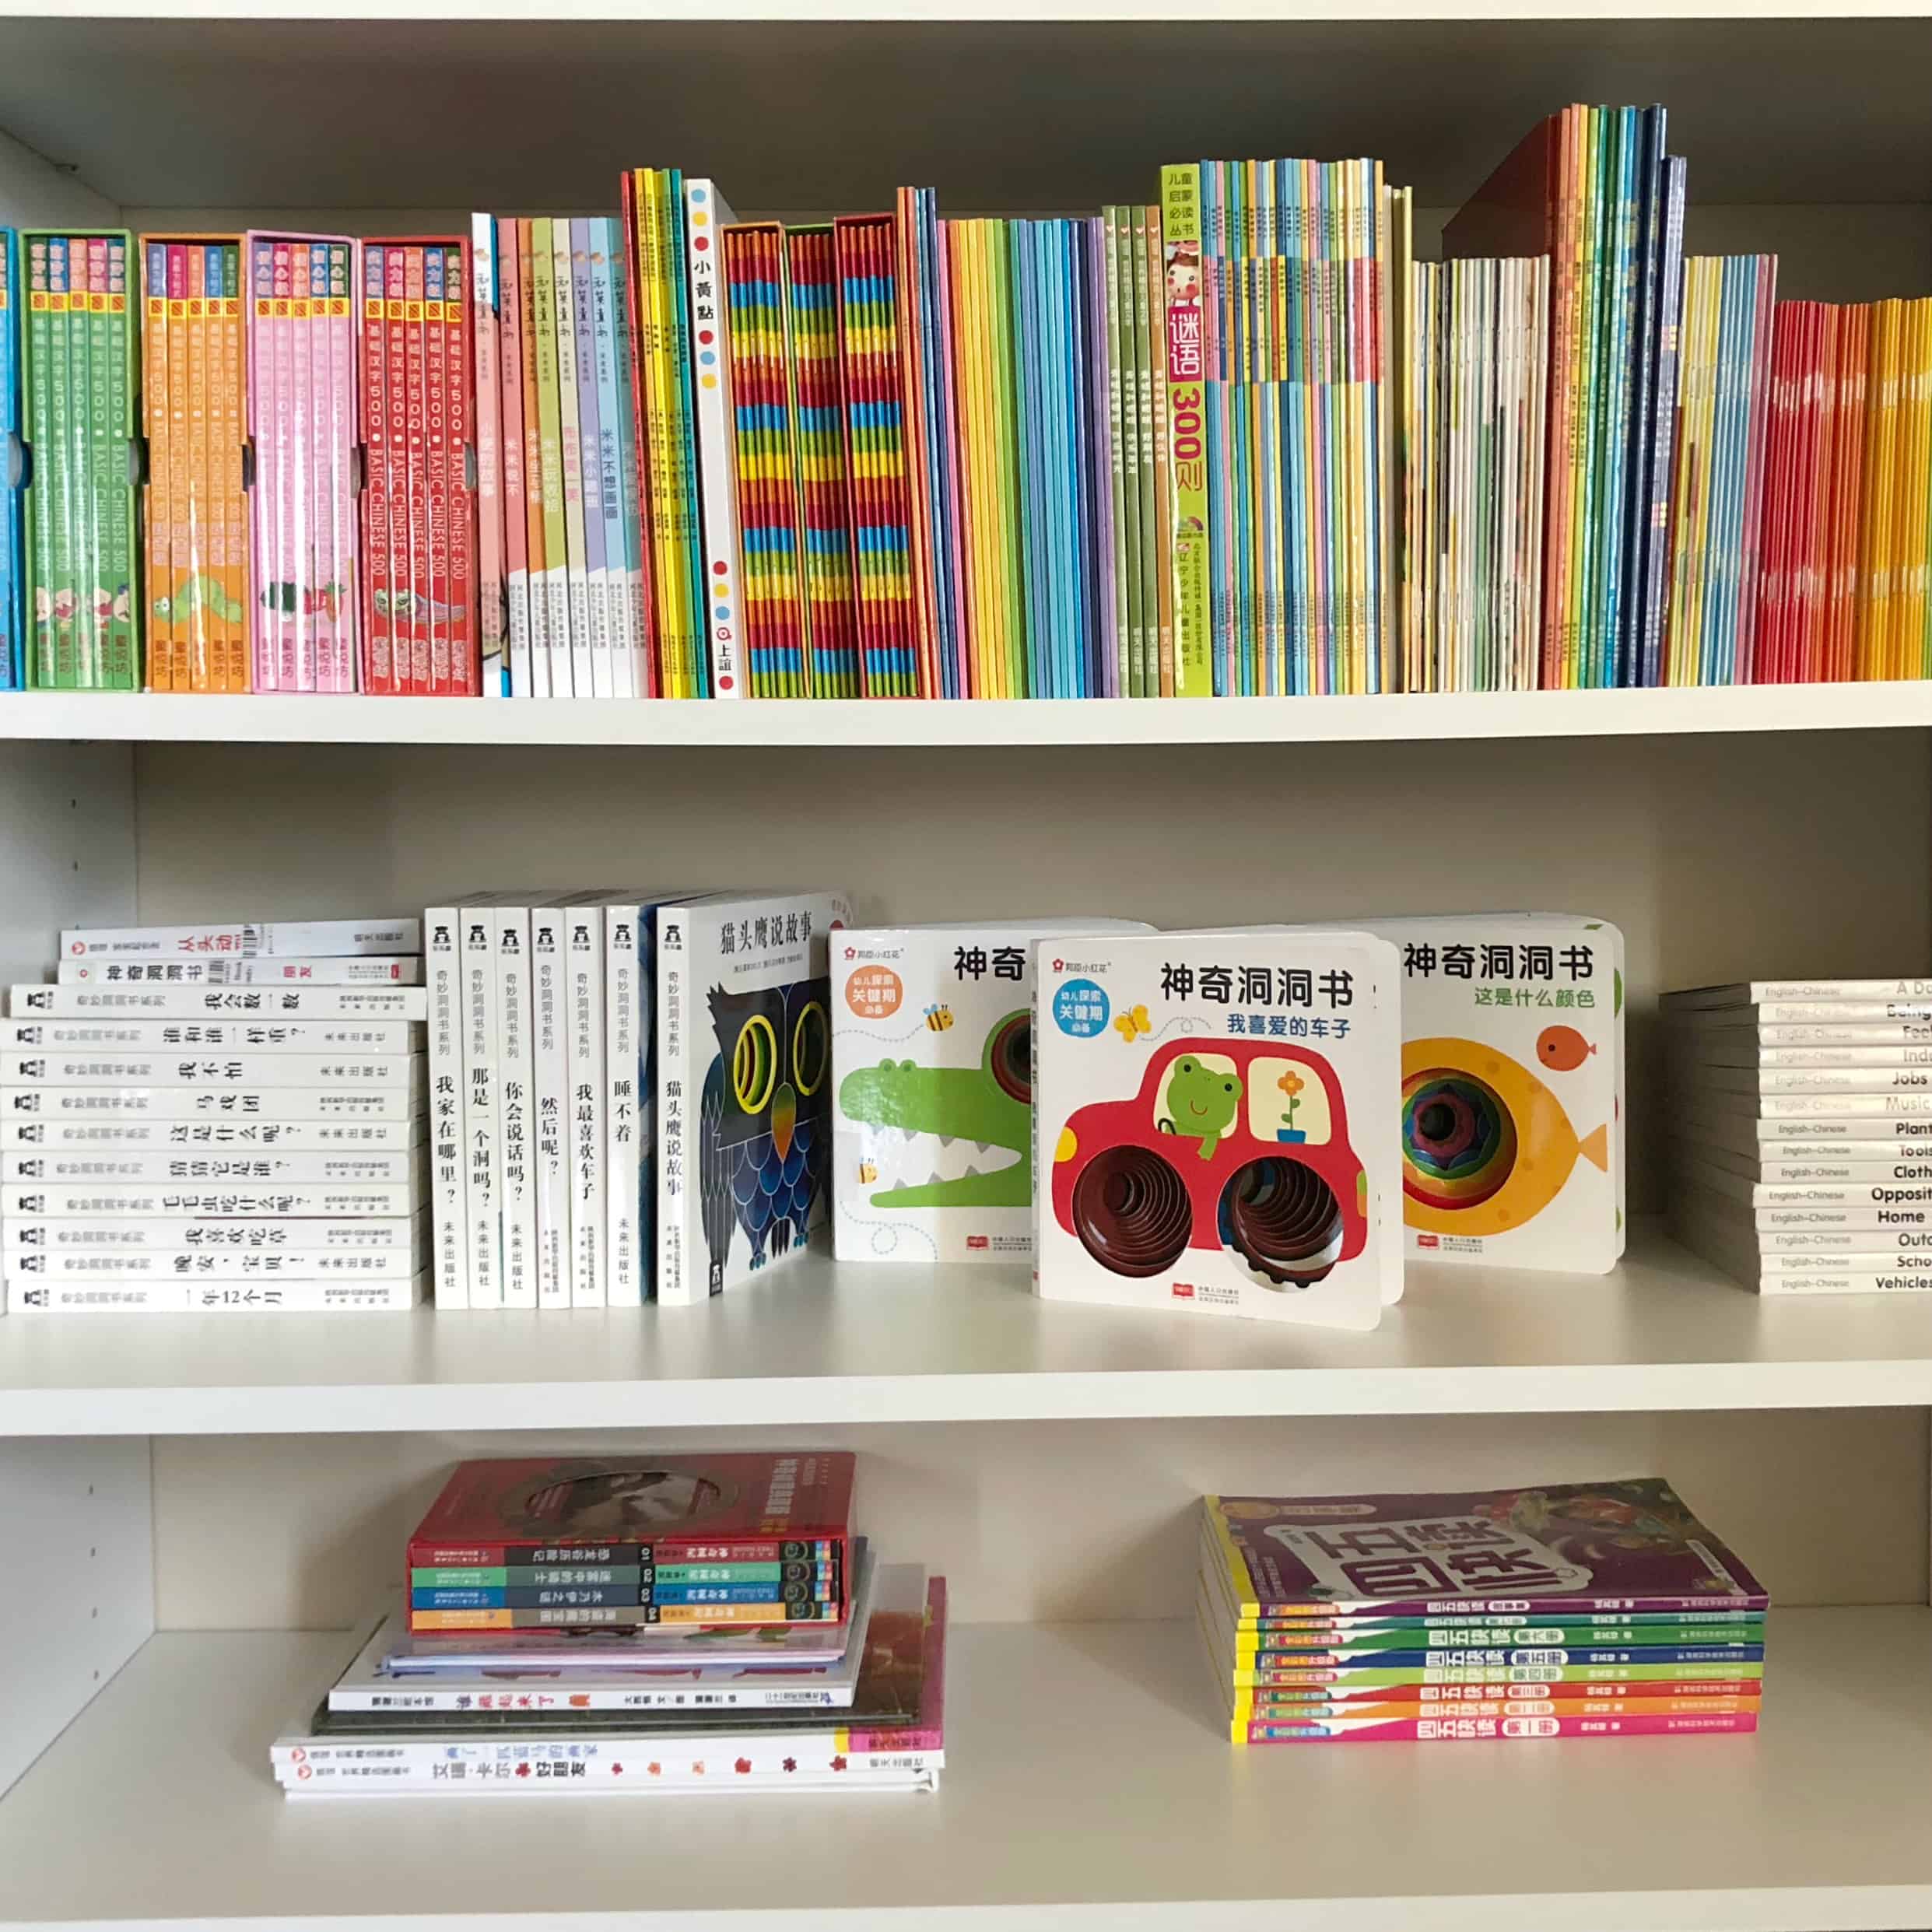 Where to Buy Chinese Books for Kids? Our Favorite Online Bookstores